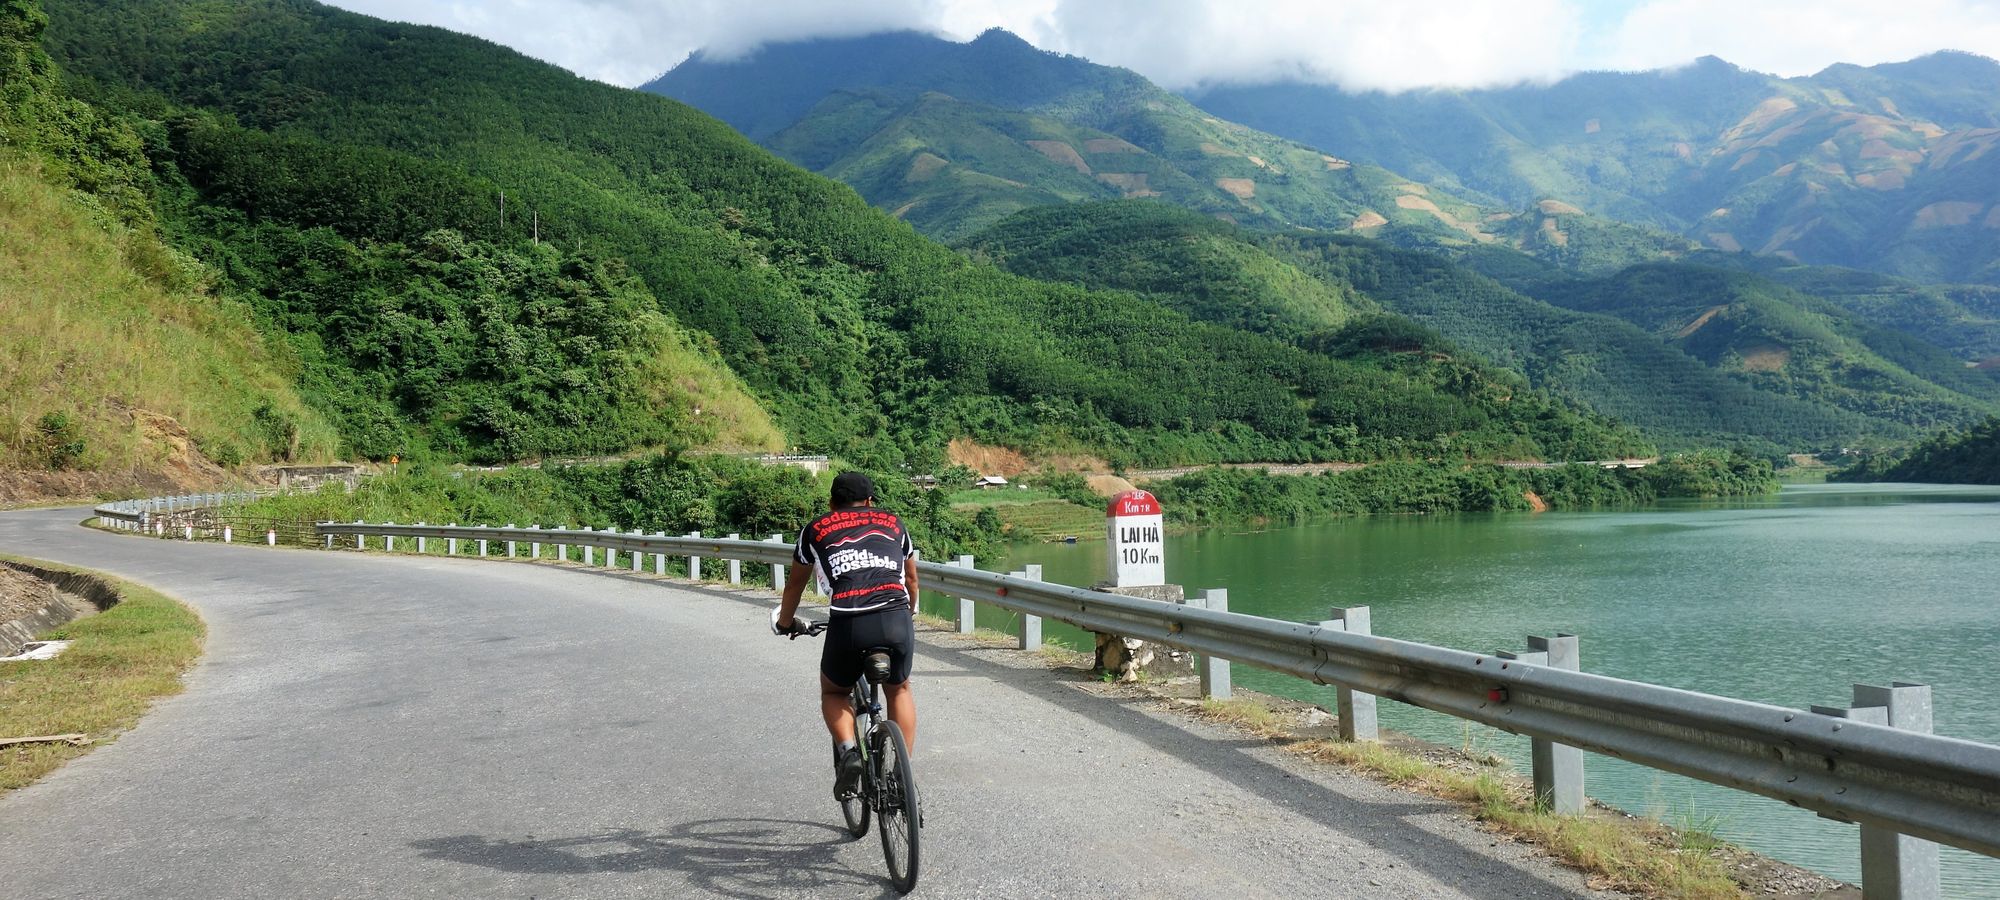 Photos from our 3 Countries 16 Days Cycling Holiday